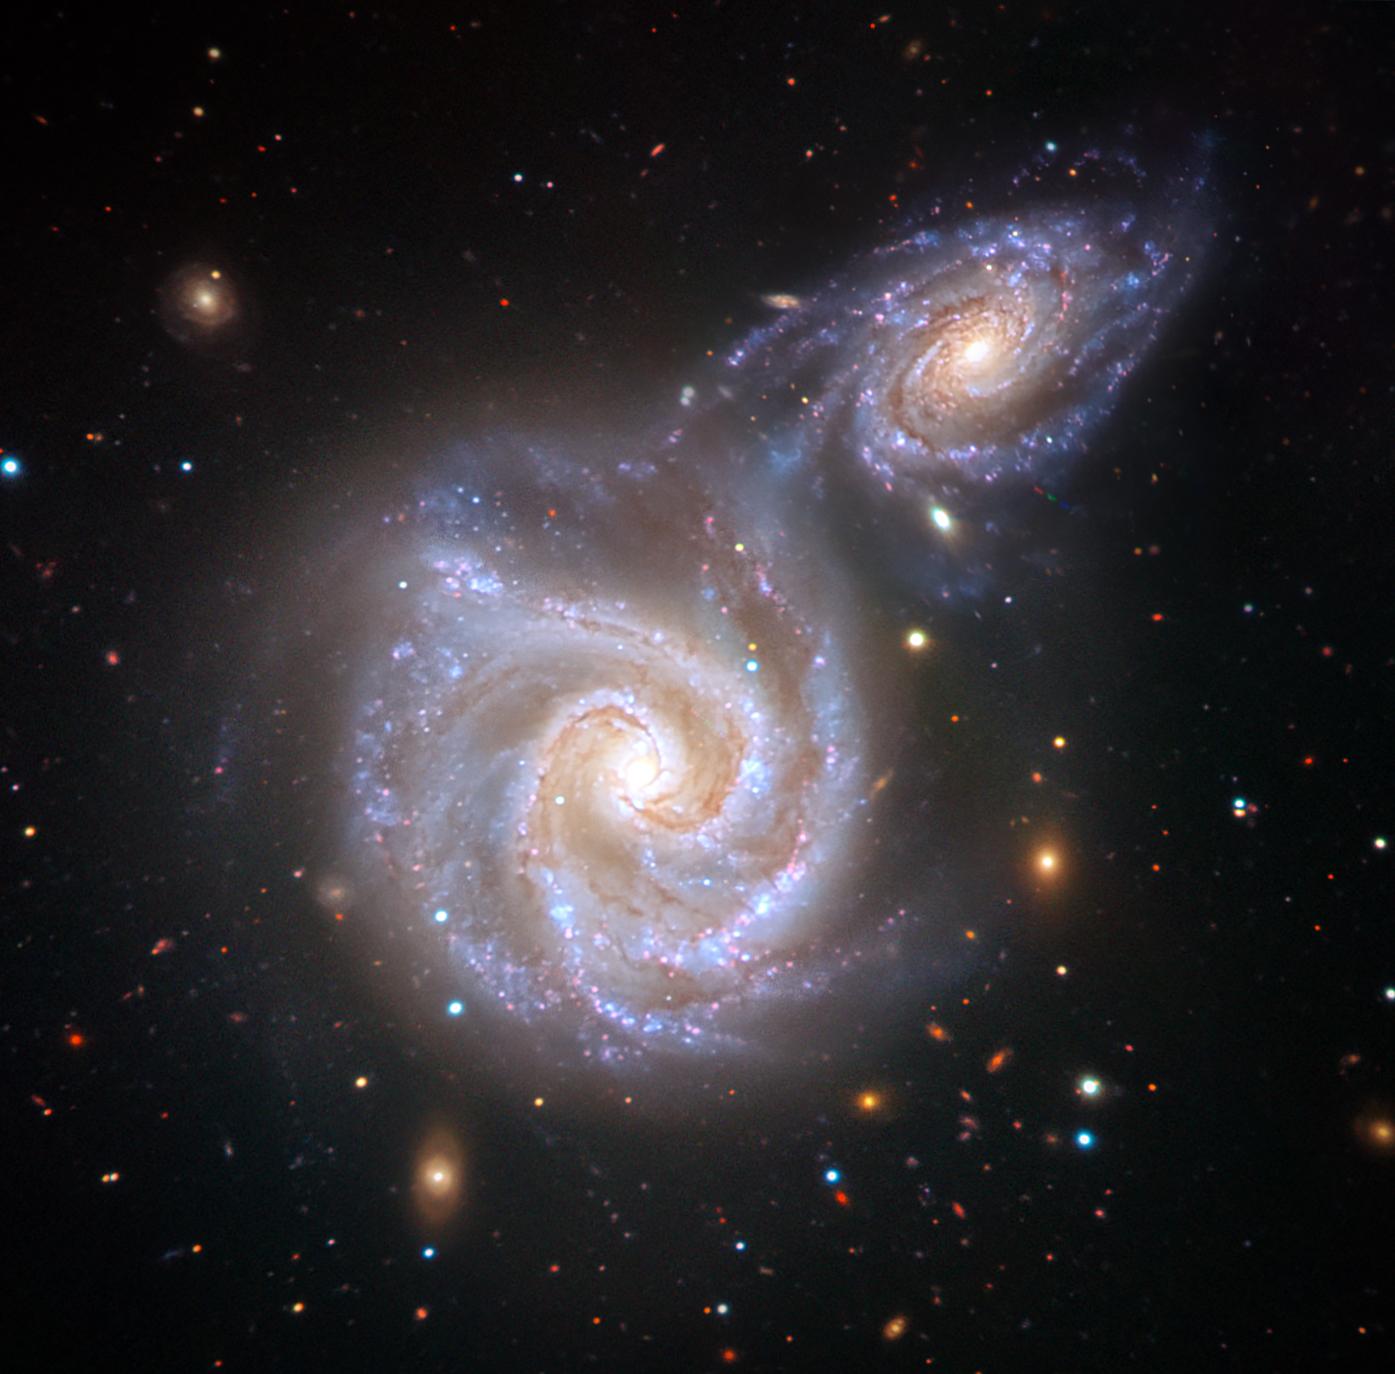 Artist's impression of two spiral galaxies one big and one much smaller about to collide